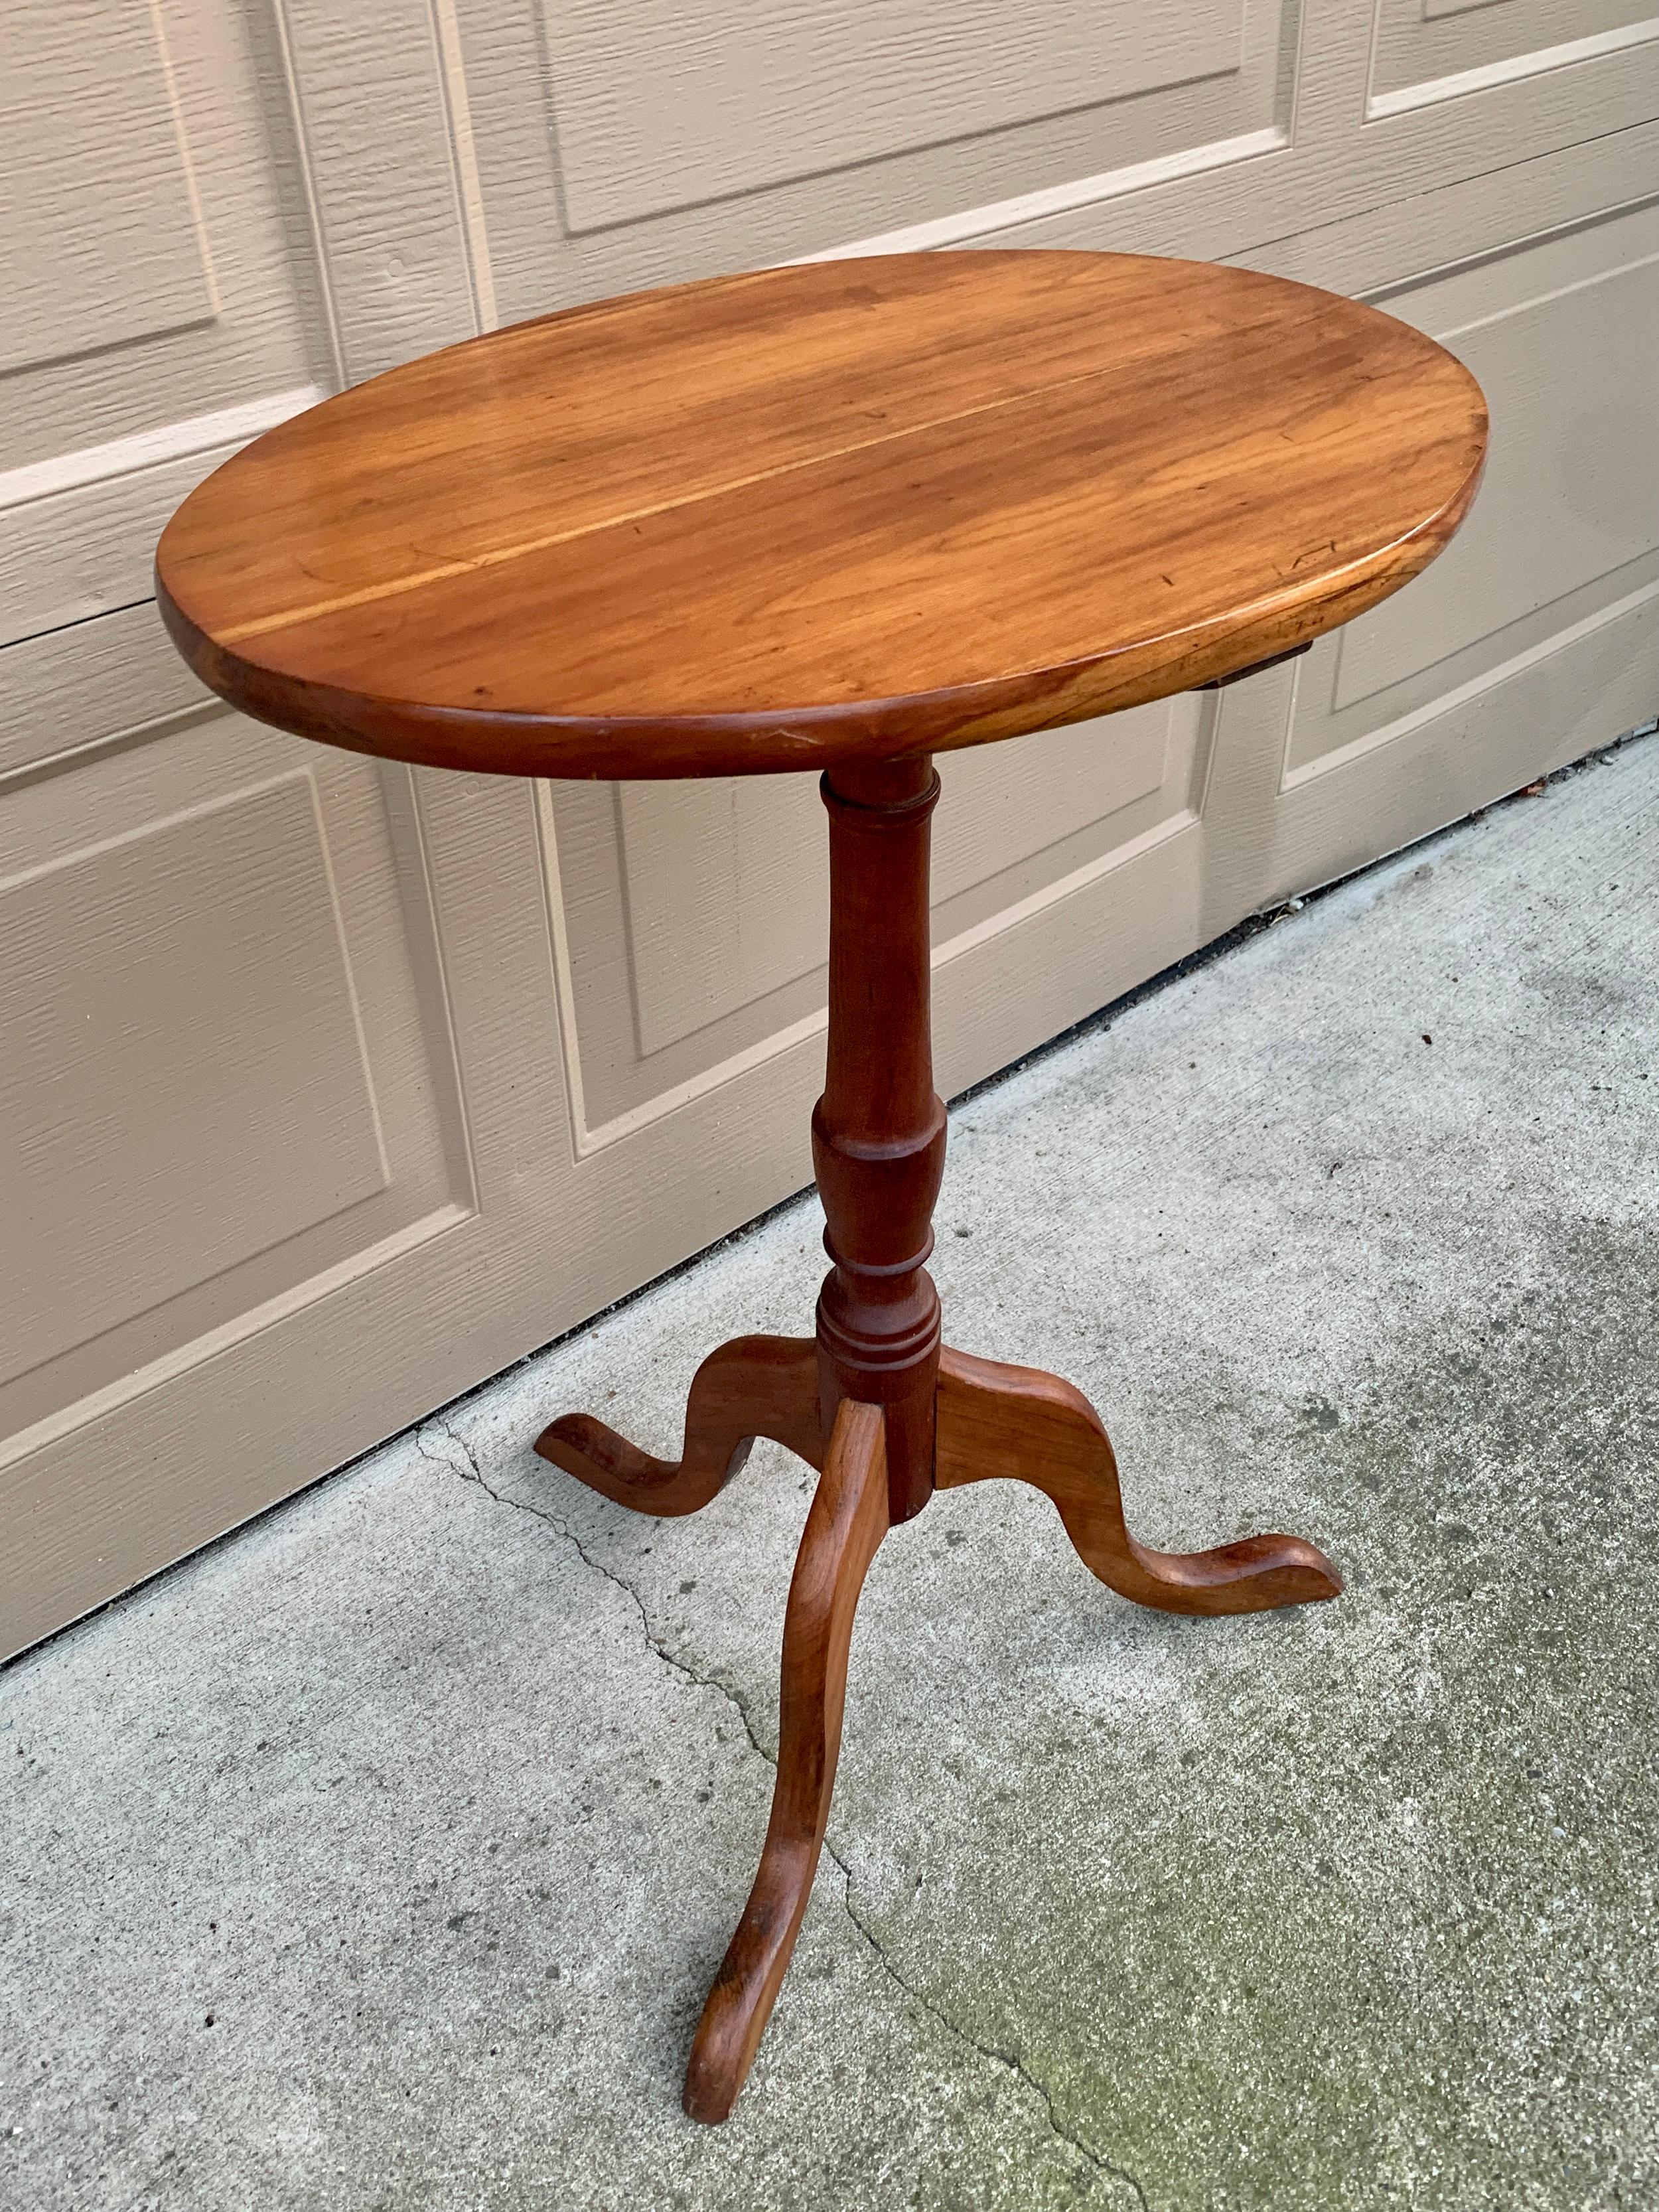 Antique American Colonial Cherry Candle Stand or Side Table, Mid 19th Century For Sale 1